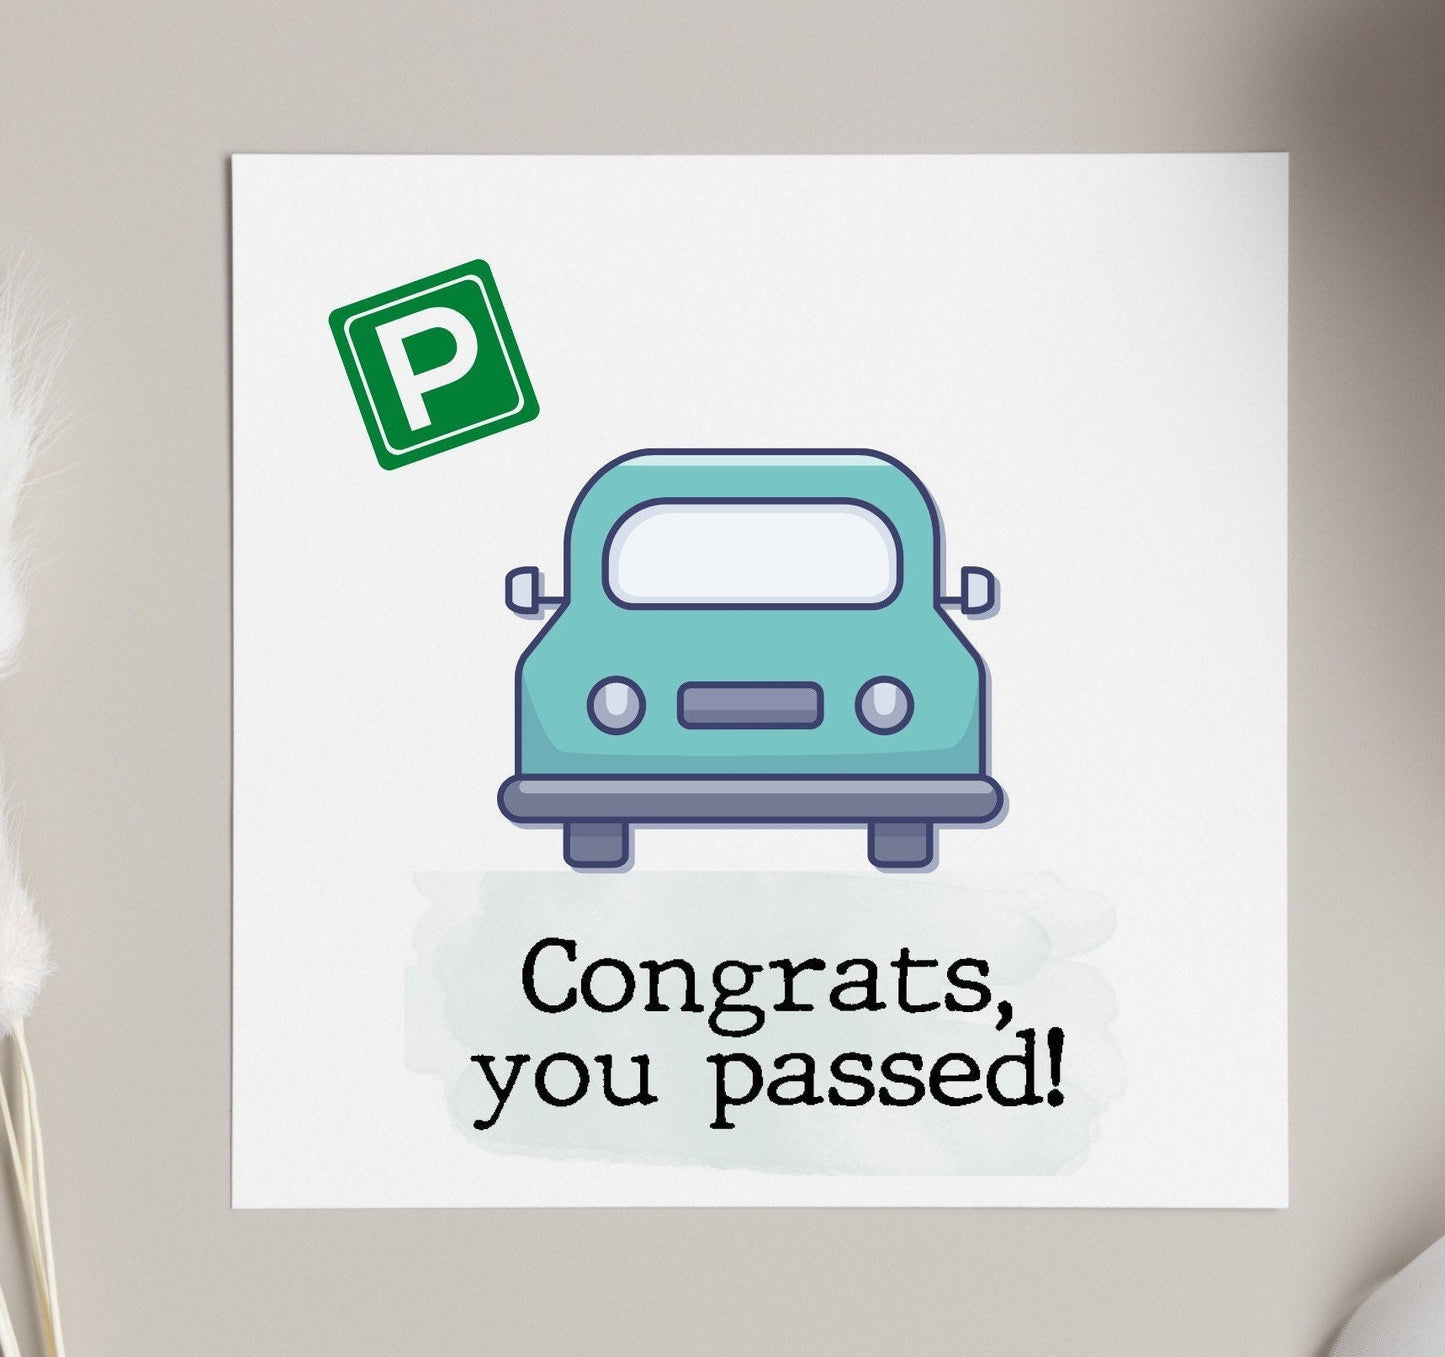 Congrats you passed your driving test card, personalised drivers test greeting card for friends and children, well done passed practical tes